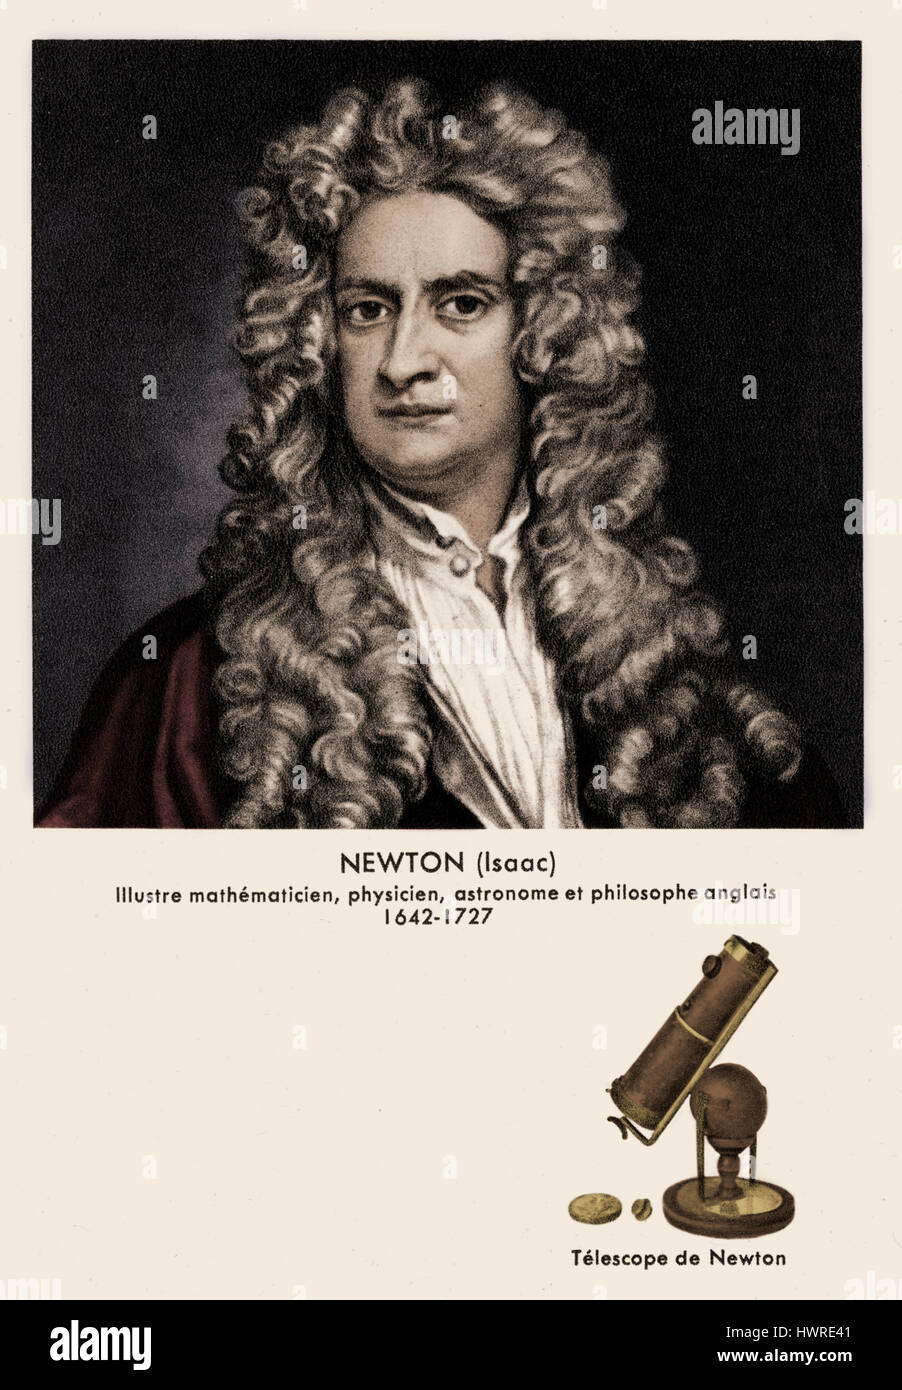 Isaac Newton, portrait. English mathematician, physicist, astronomer and philosopher, 25 December 1642 - 20 March 1727 - Newton 's telescope also shown. Stock Photo